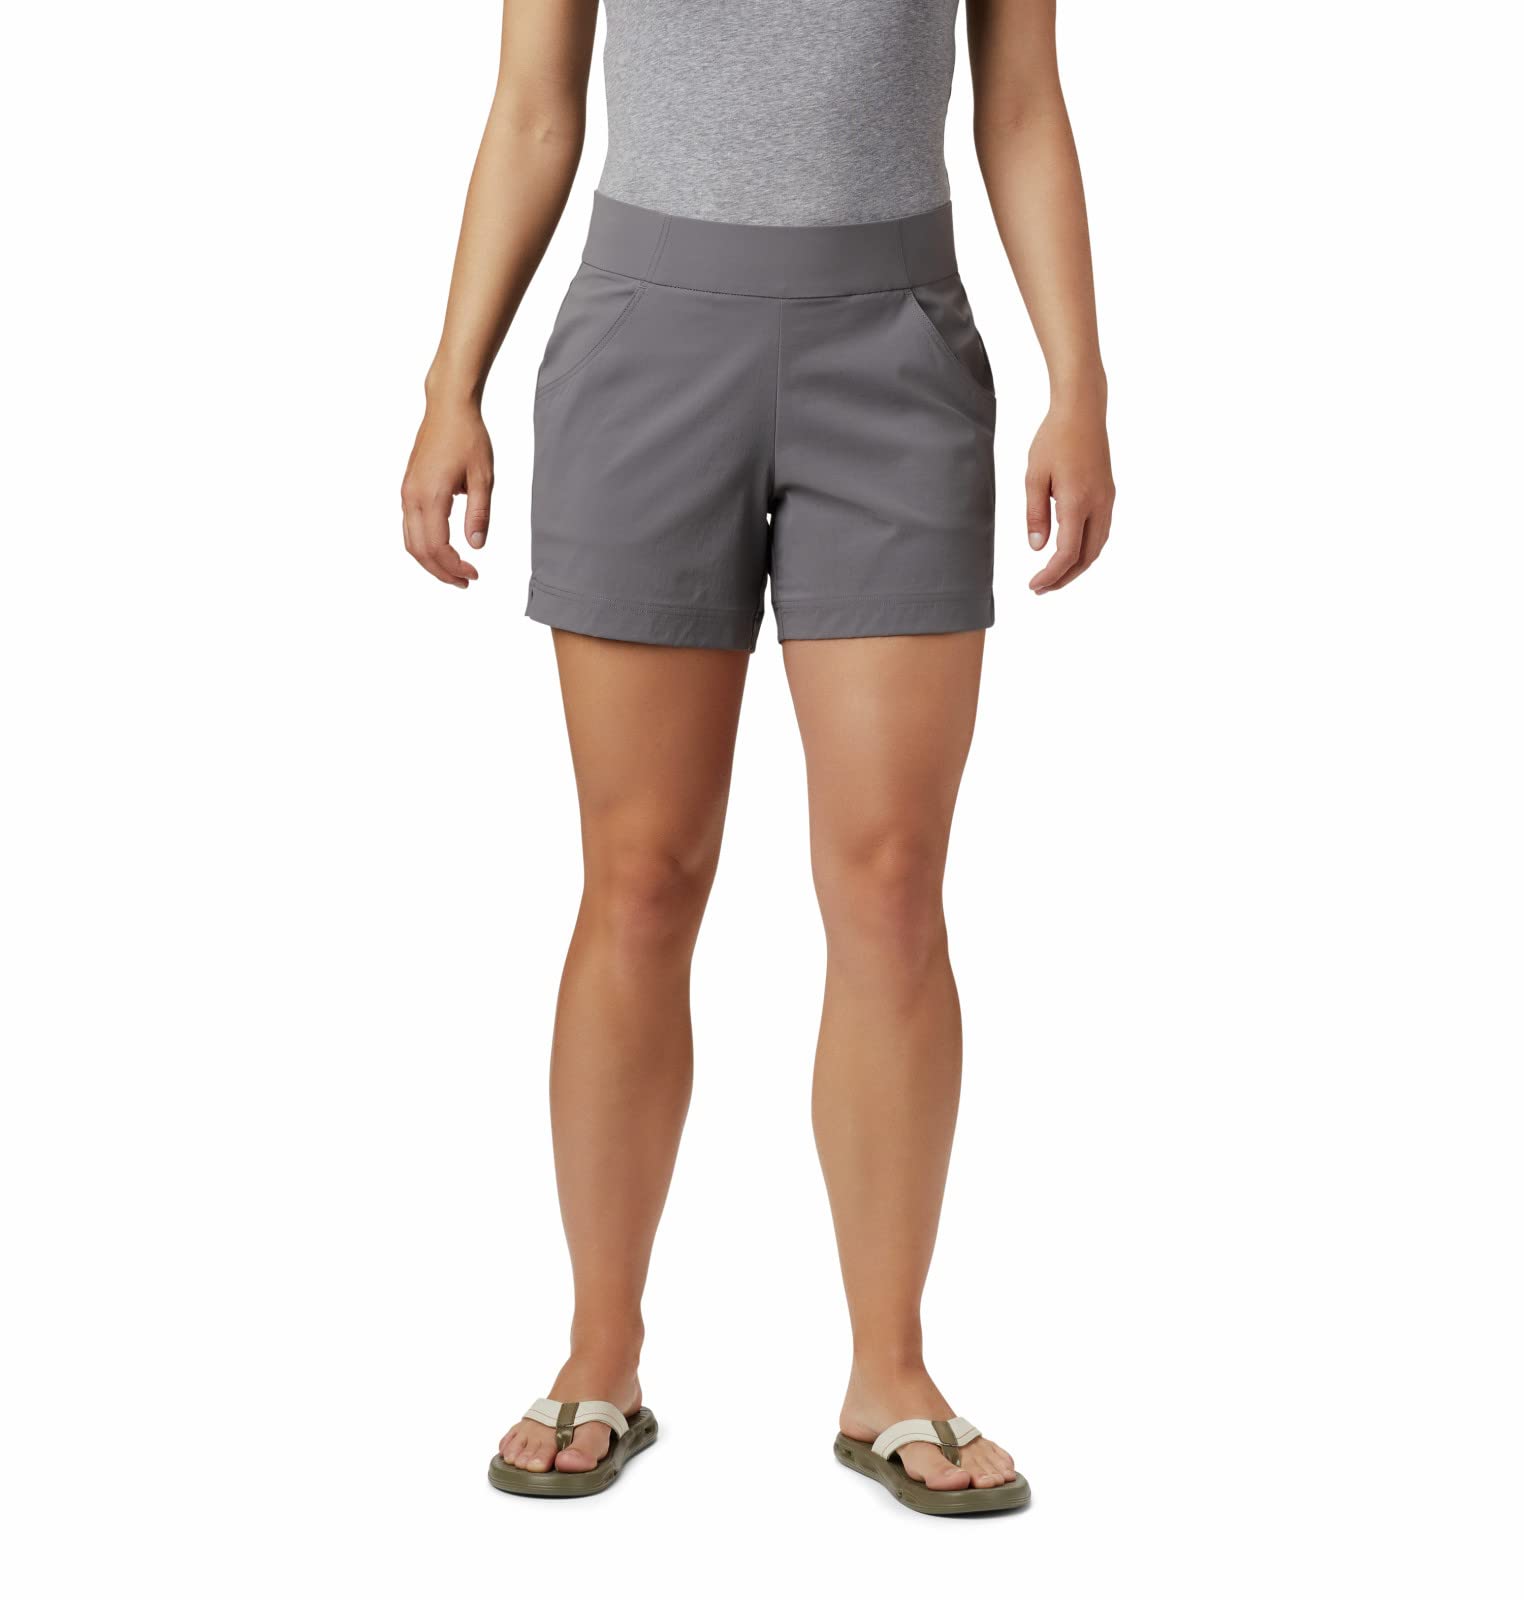 Columbia Women's Anytime Casual Short Shorts, City Grey, X-Large x 5